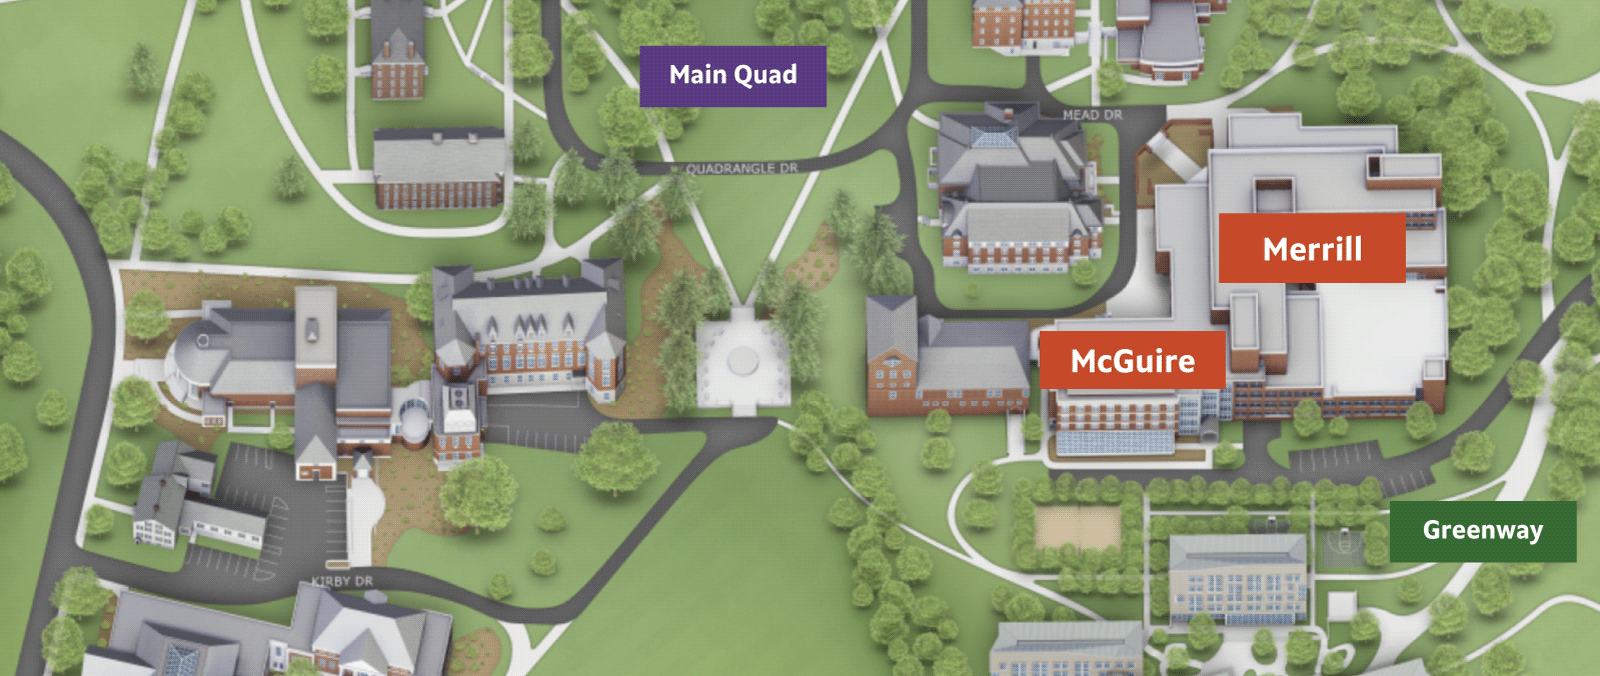 Merrill and McGuire locations shown on campus map